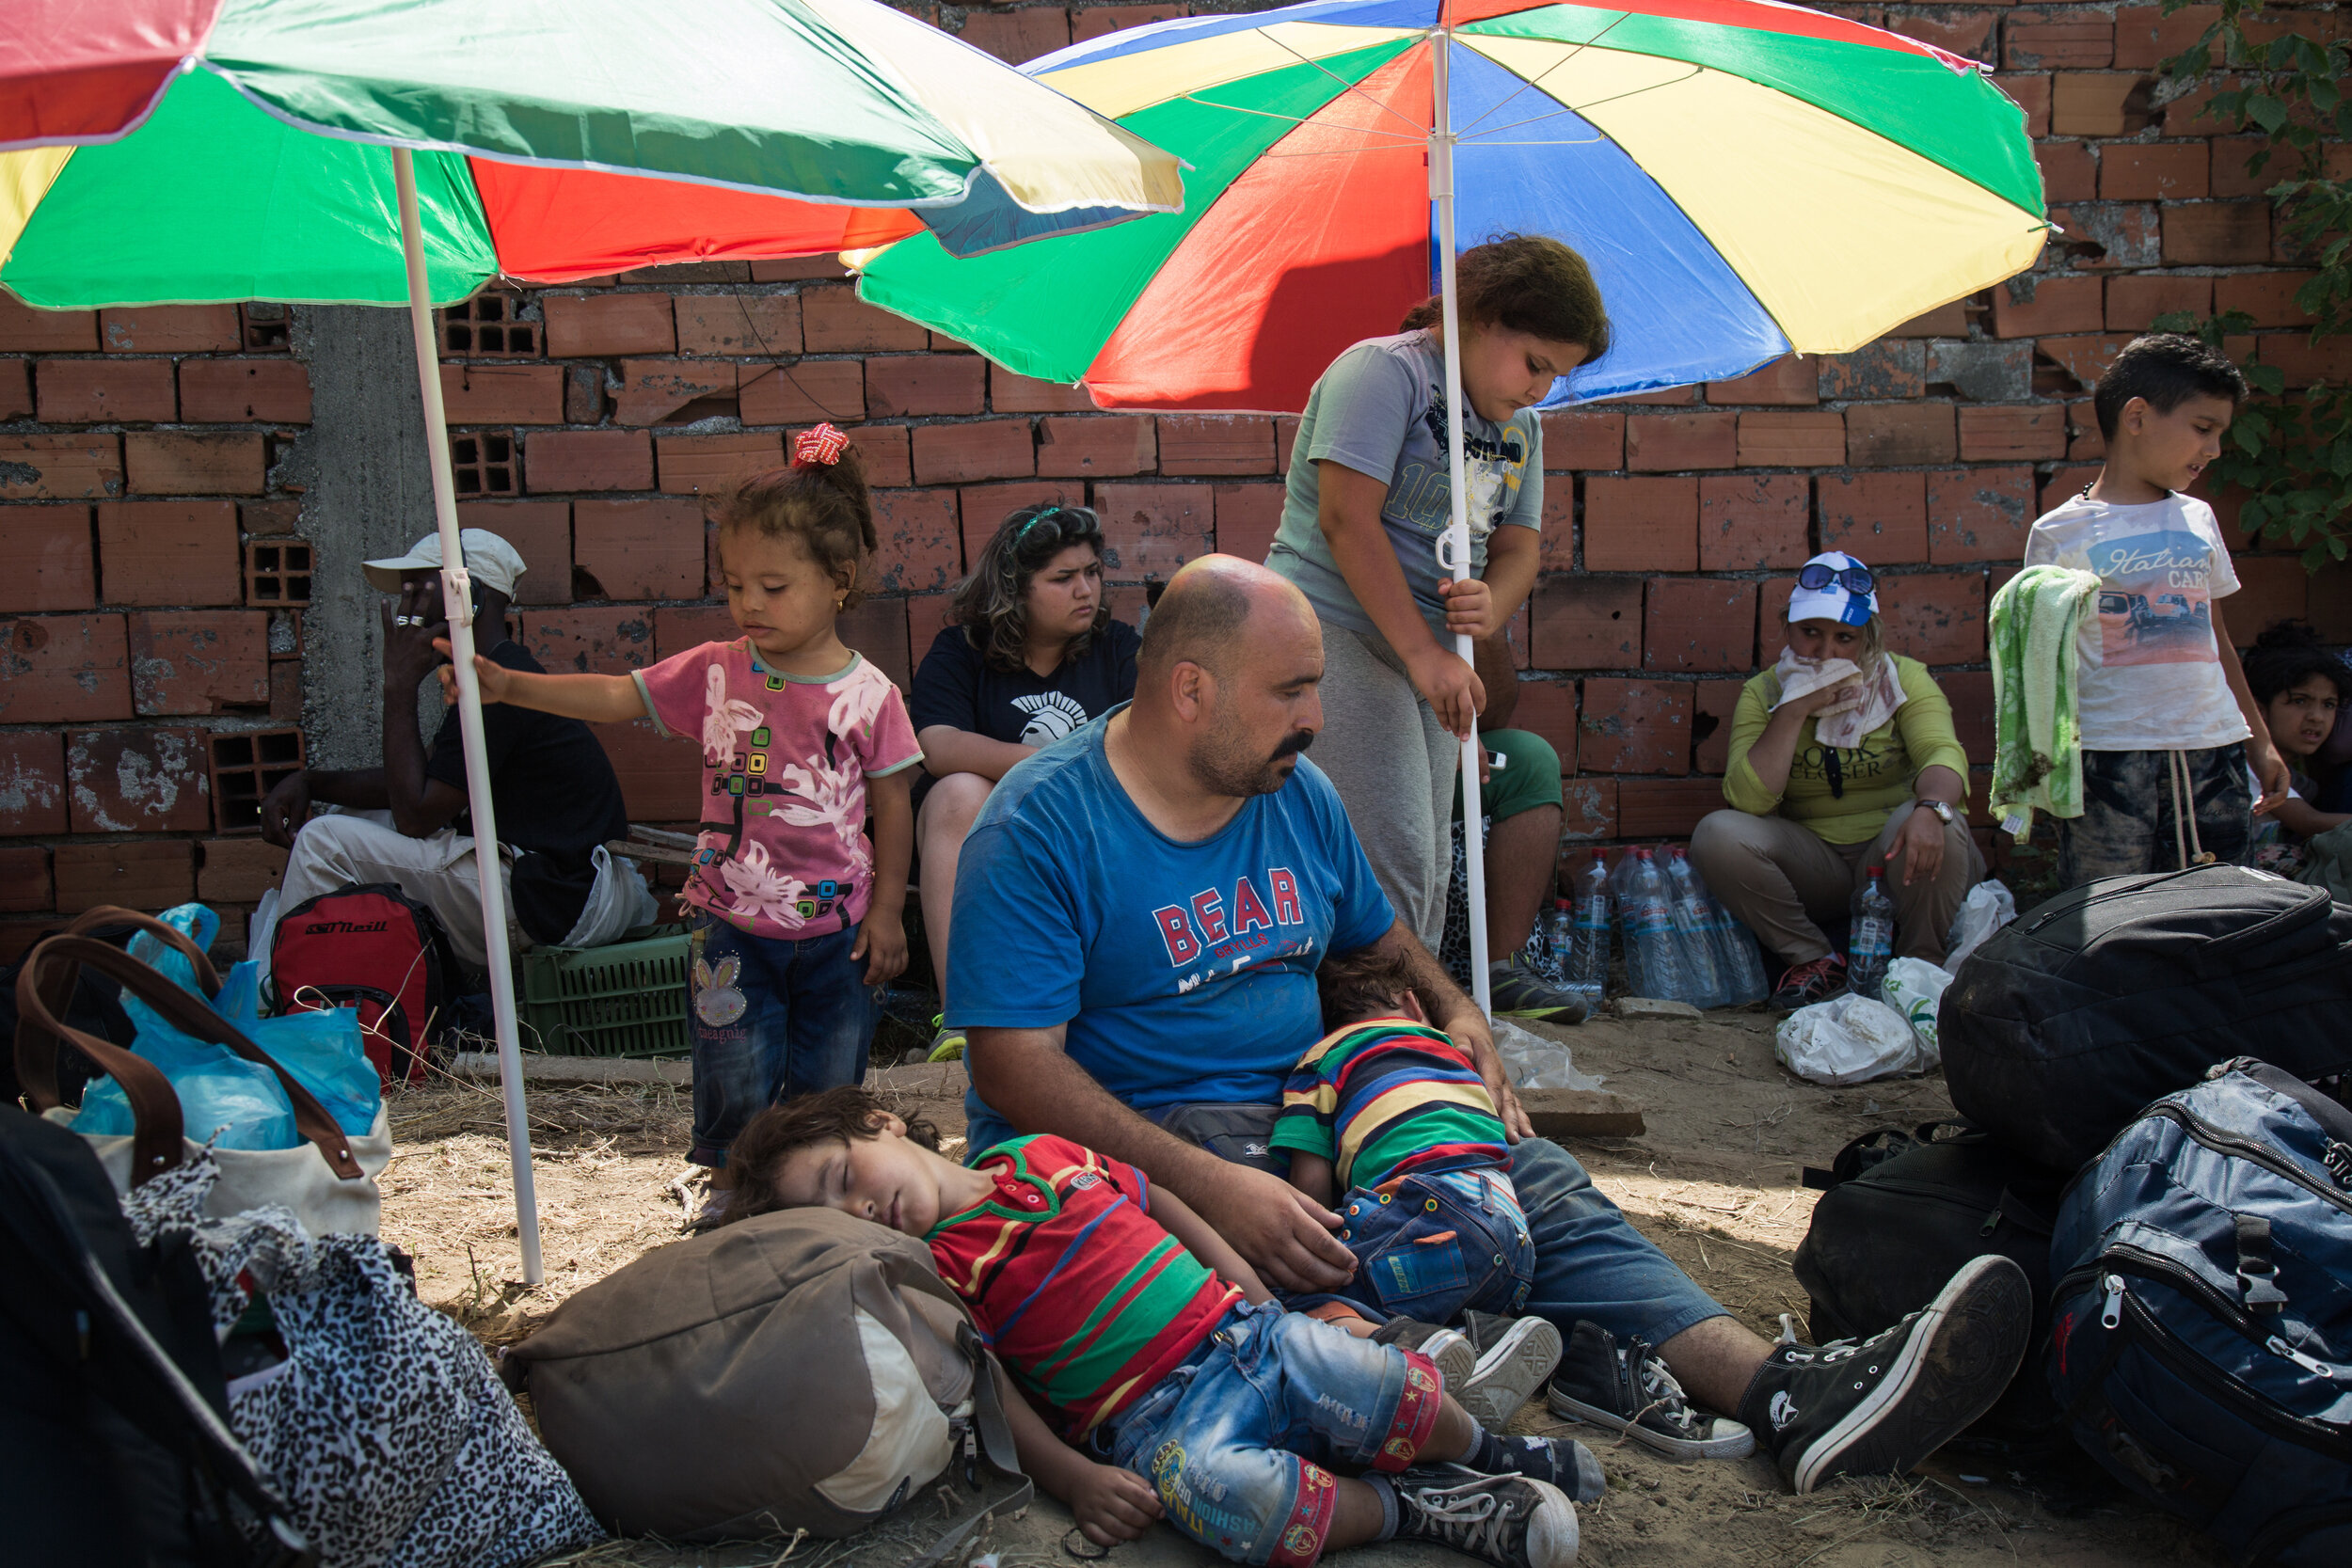  A refugee family waits at the reception center in Macedonia on August 26, 2015. After crossing from Greece into Macedonia, refugees are held at a reception center near the town of Gevgelija. To transit through Macedonia, they receive a document allo